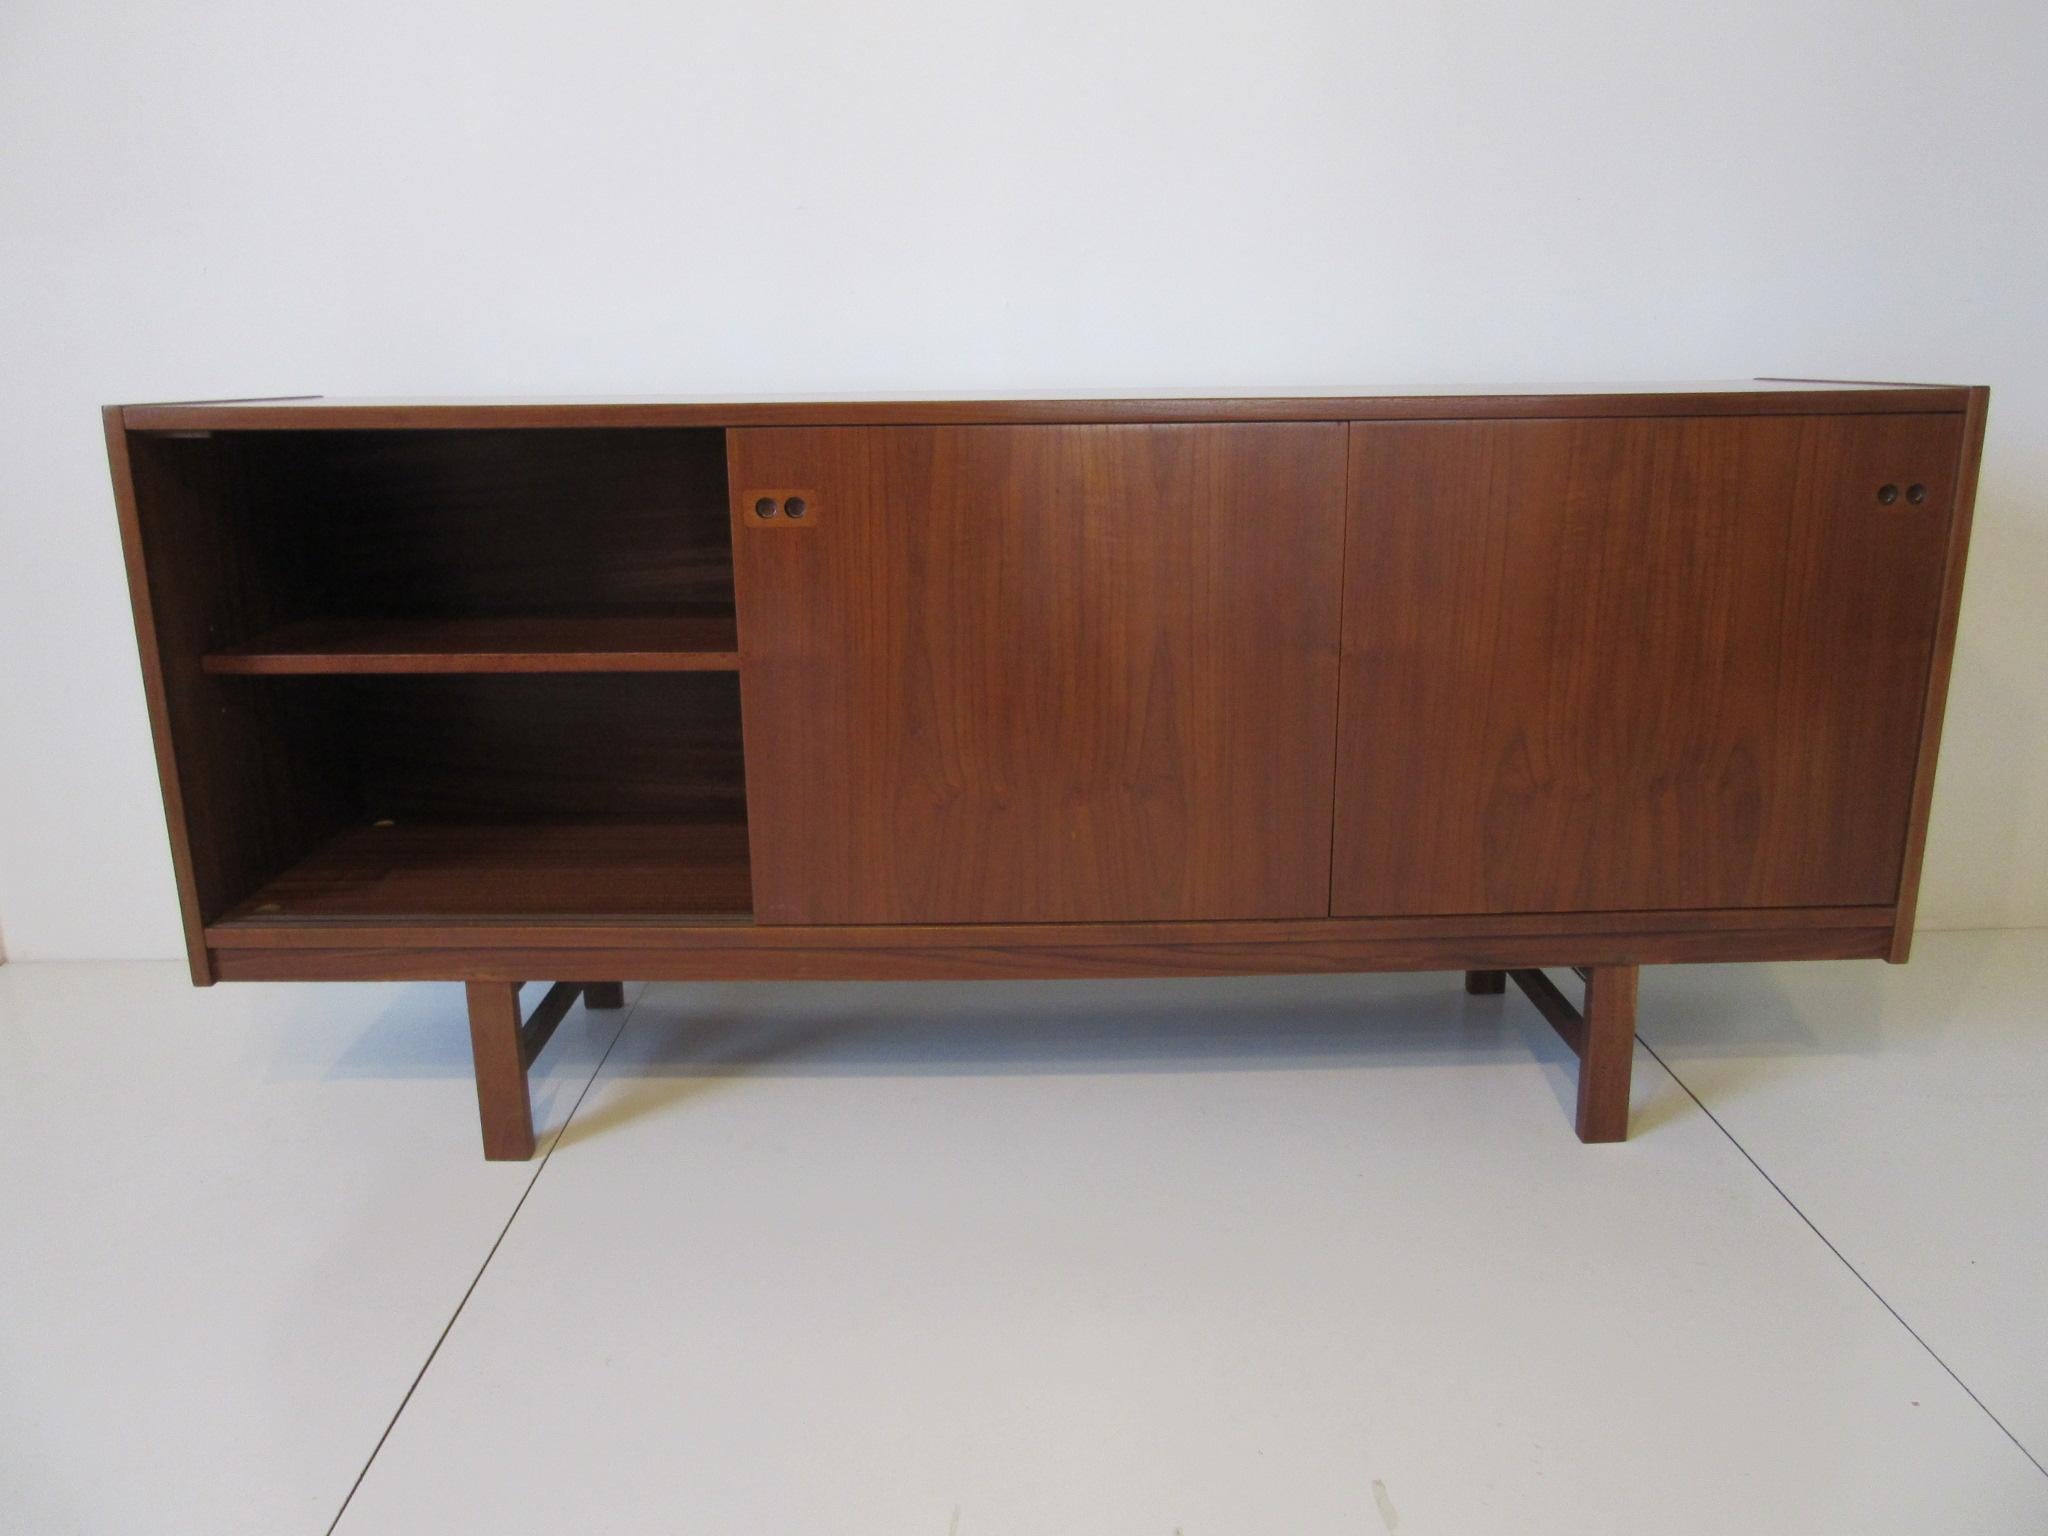 A three sliding door teak wood credenza with one adjustable shelve to each side and the middle section having three slide in shelves. Finger pulls with contrasting wood tone design to the doors and the backside is finished in a flamed grained teak,